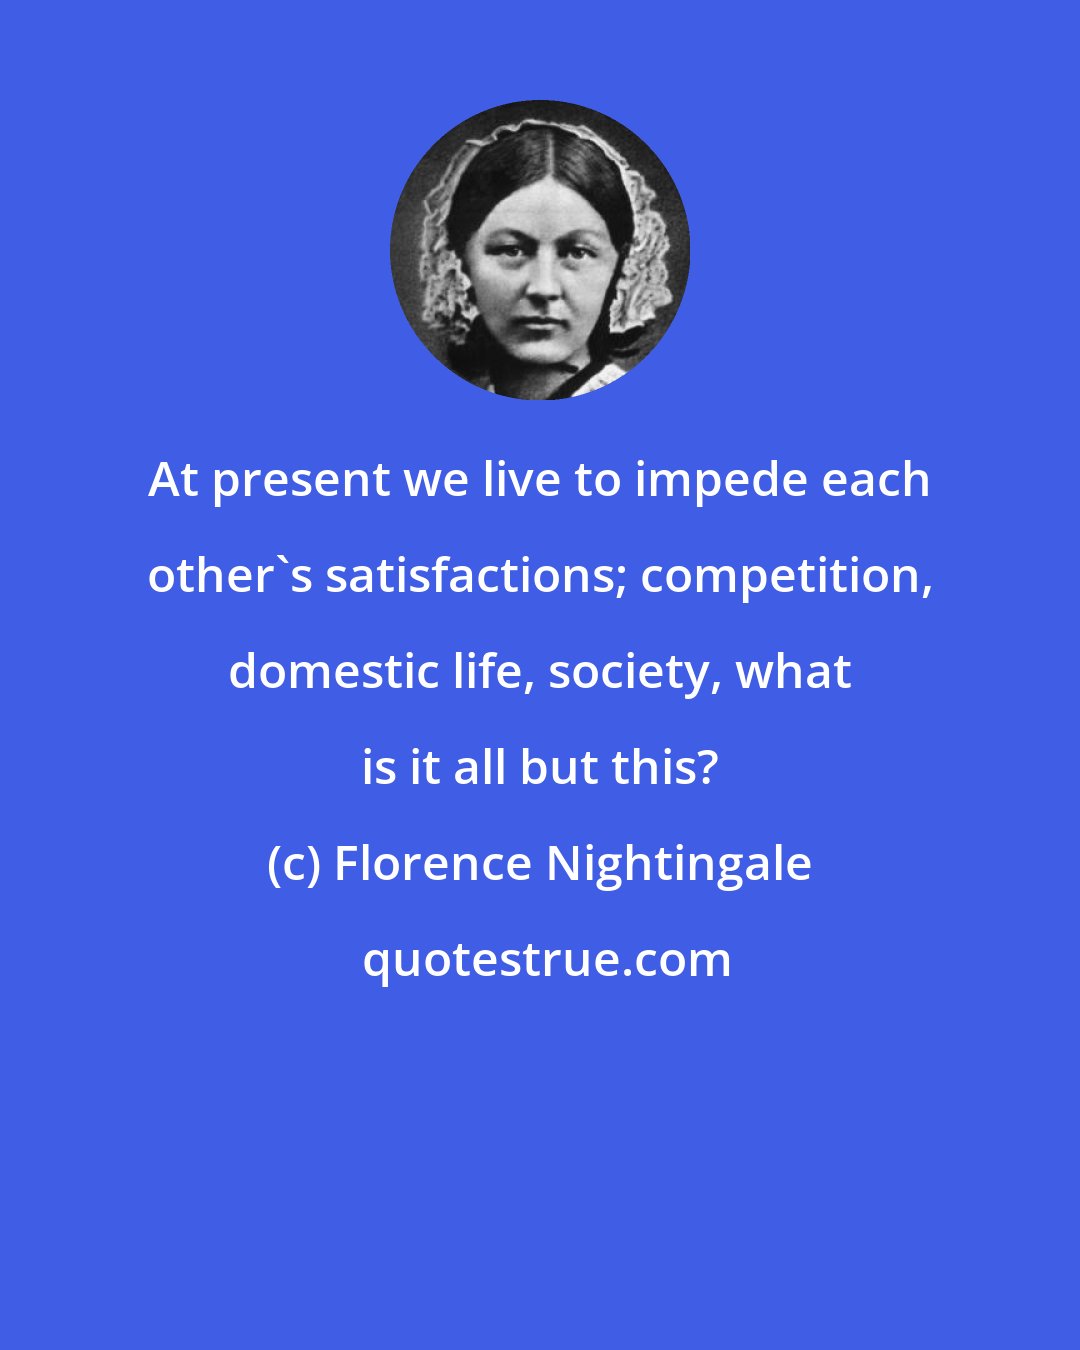 Florence Nightingale: At present we live to impede each other's satisfactions; competition, domestic life, society, what is it all but this?